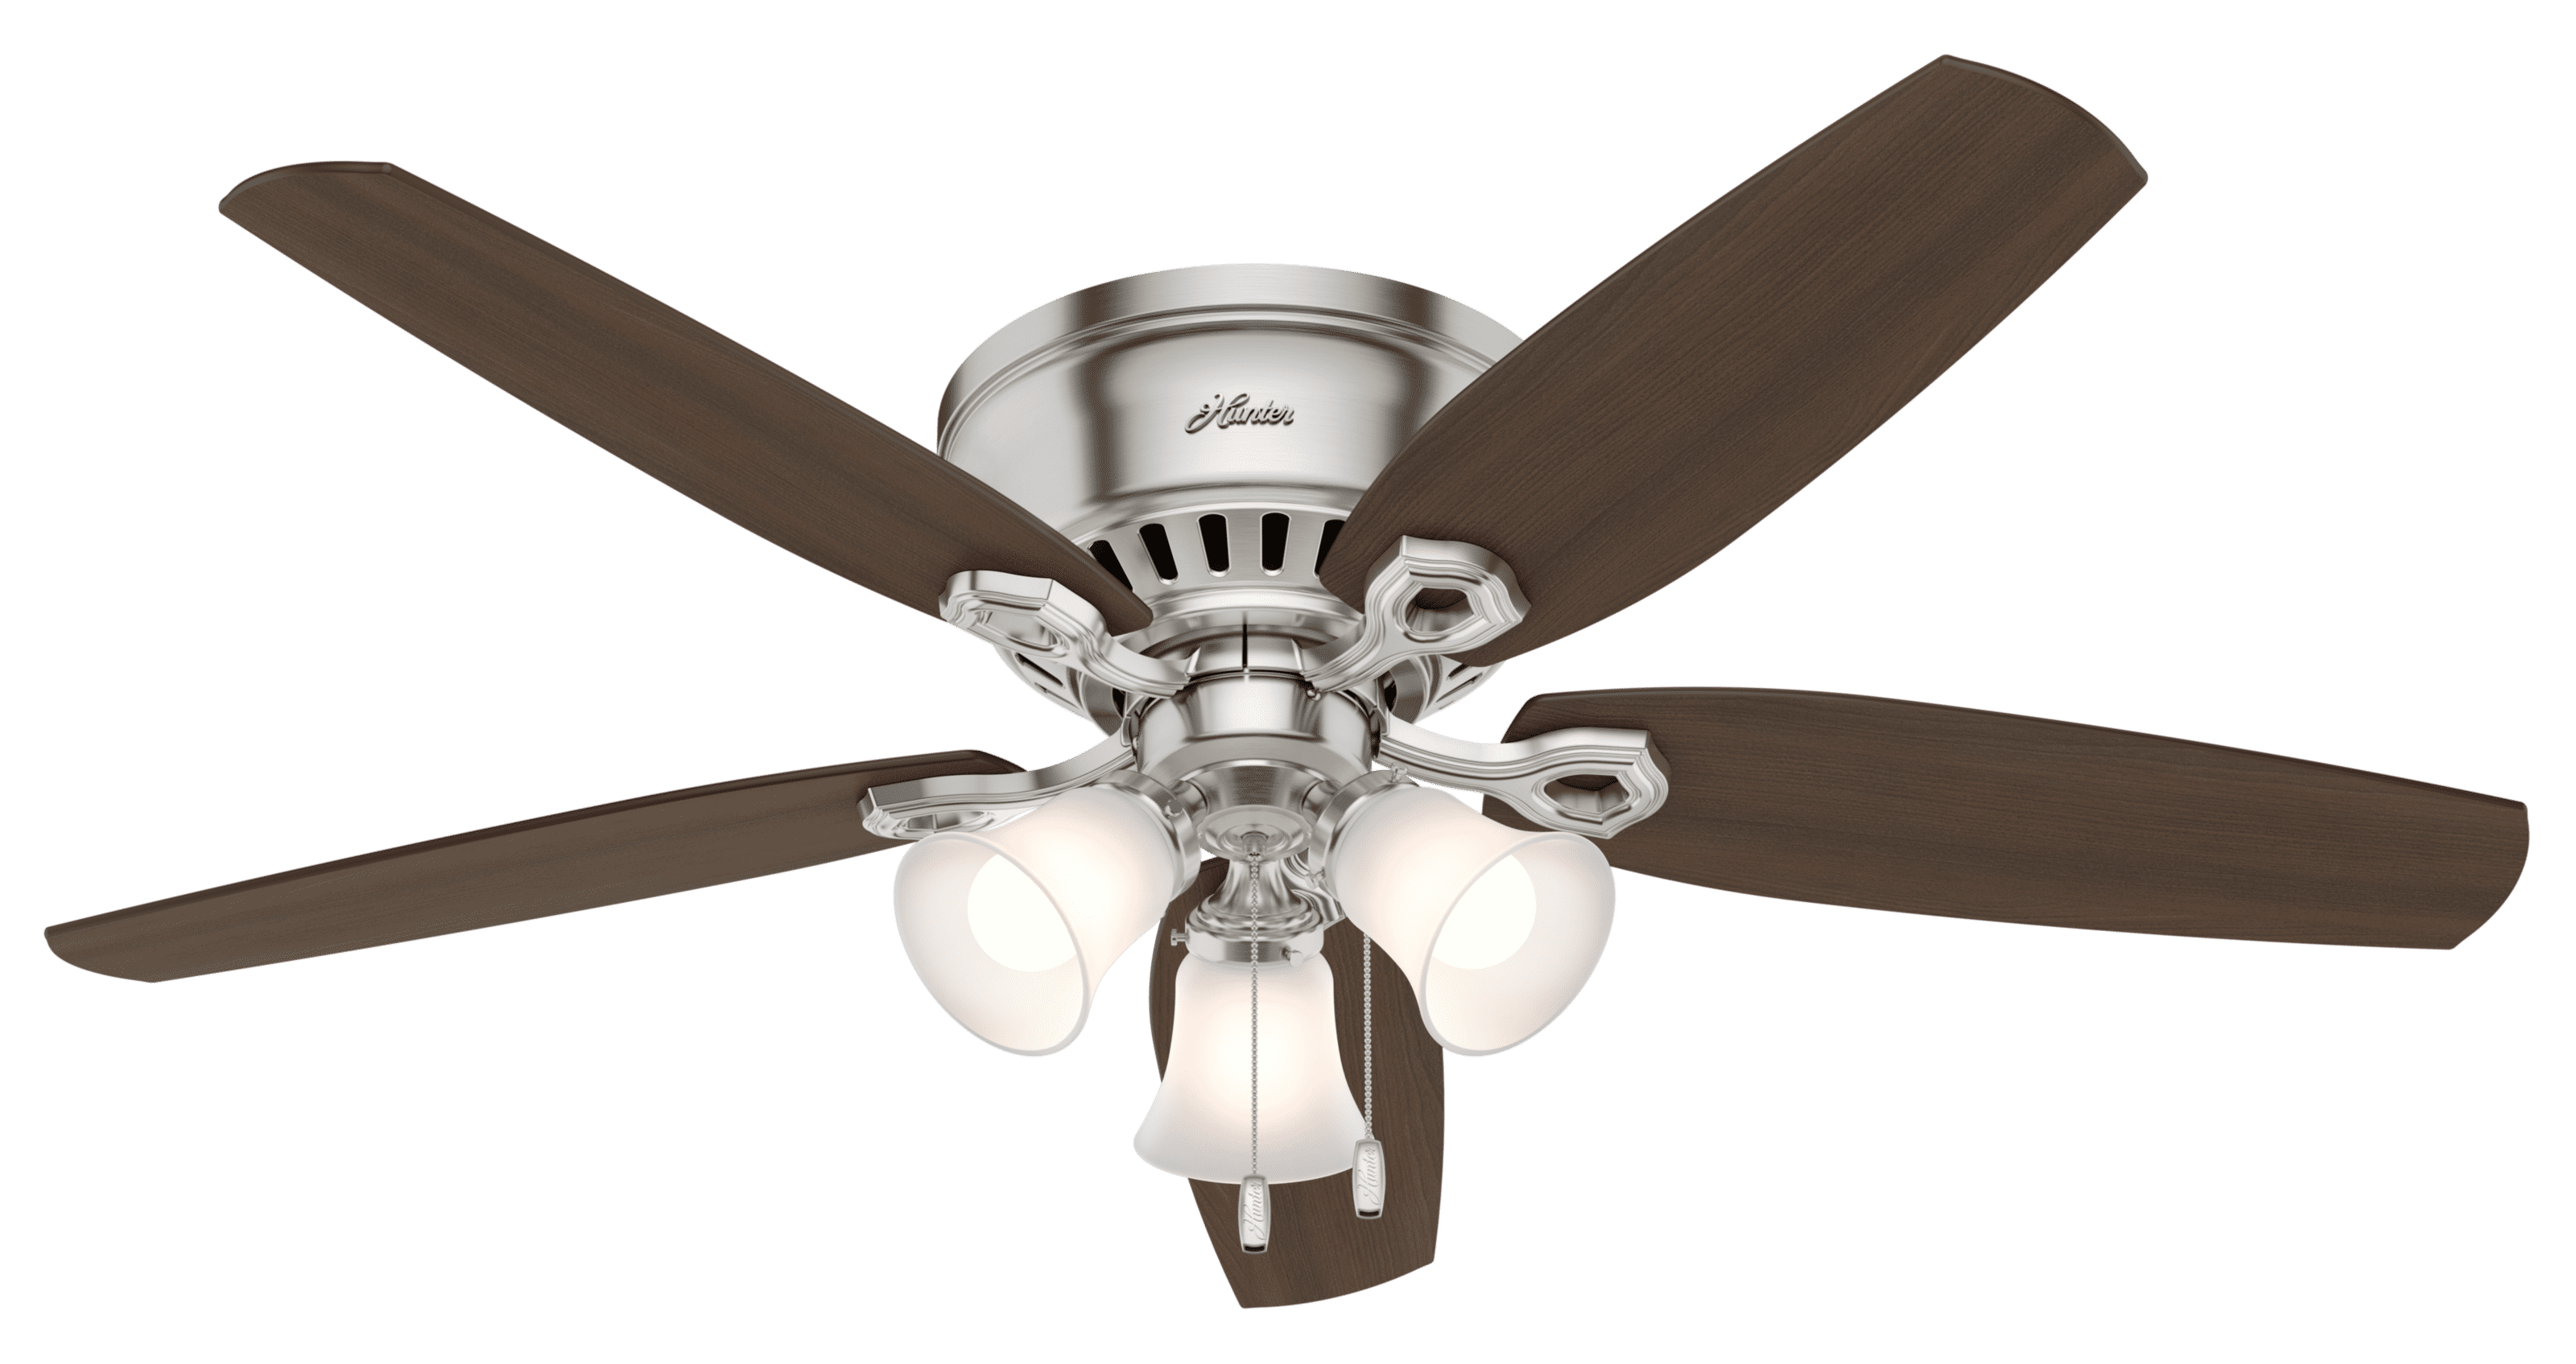 Bulb Not Included  Five Reversible Blades and Frosted Dome Light Hyperikon Ceiling Fan with Remote Control 52-inch Indoor Black Ceiling Fan